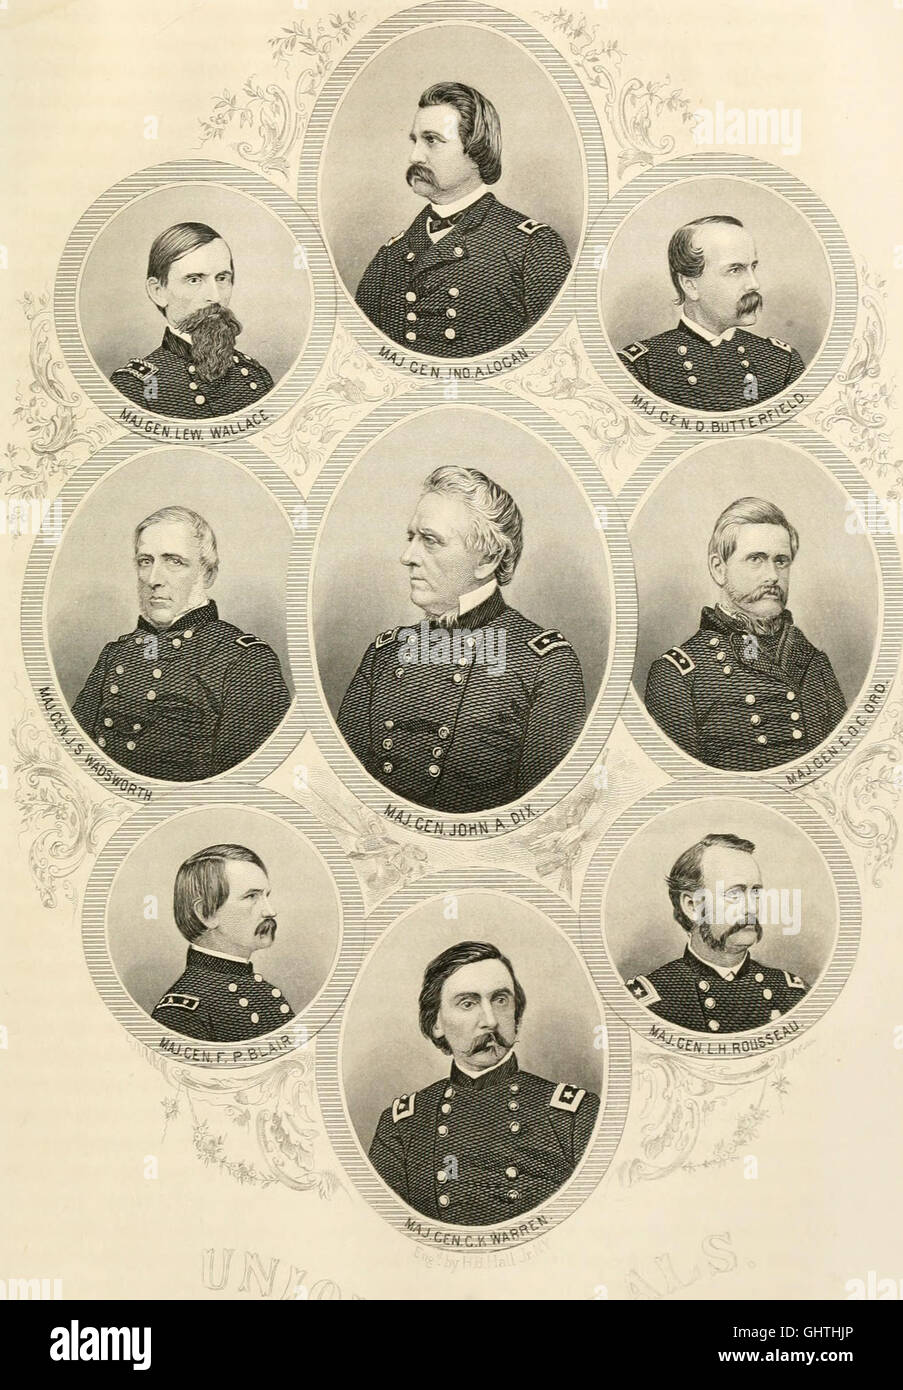 The history of the Civil War in America; comprising a full and impartial account of the origin and progress of the rebellion, of the various naval and military engagements, of the heroic deeds Stock Photo